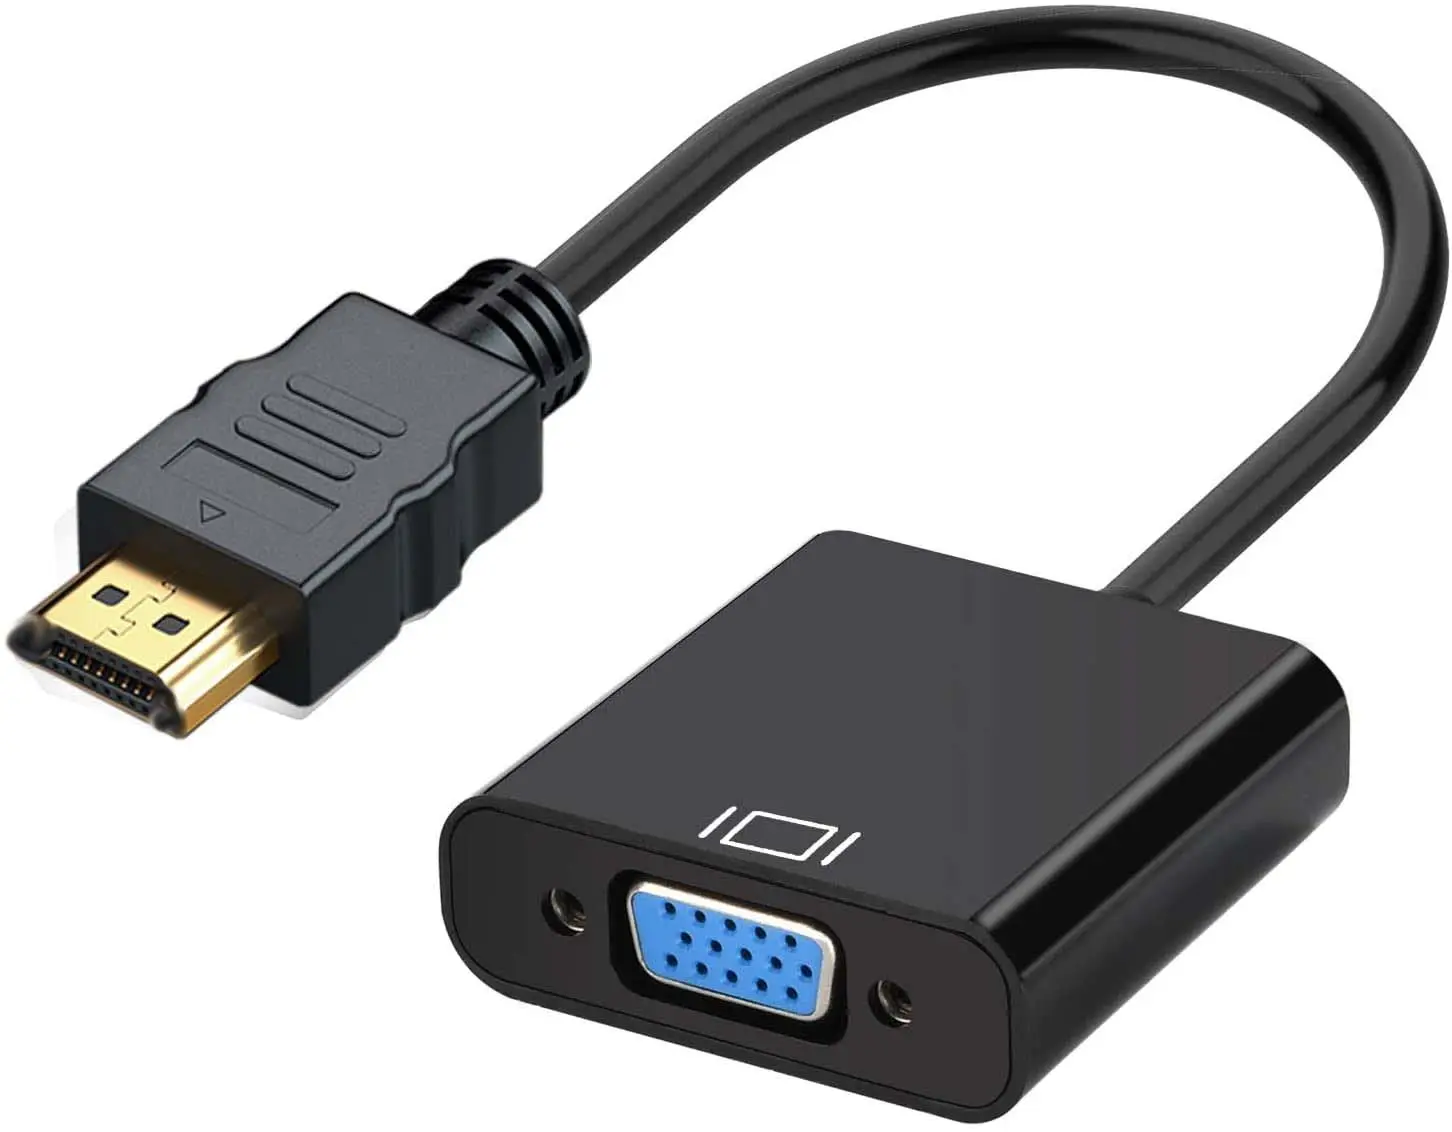 HDTV TO VGA Adapter cheap price 1080P HDTV to VGA Adapter male to female Audio Video Cable